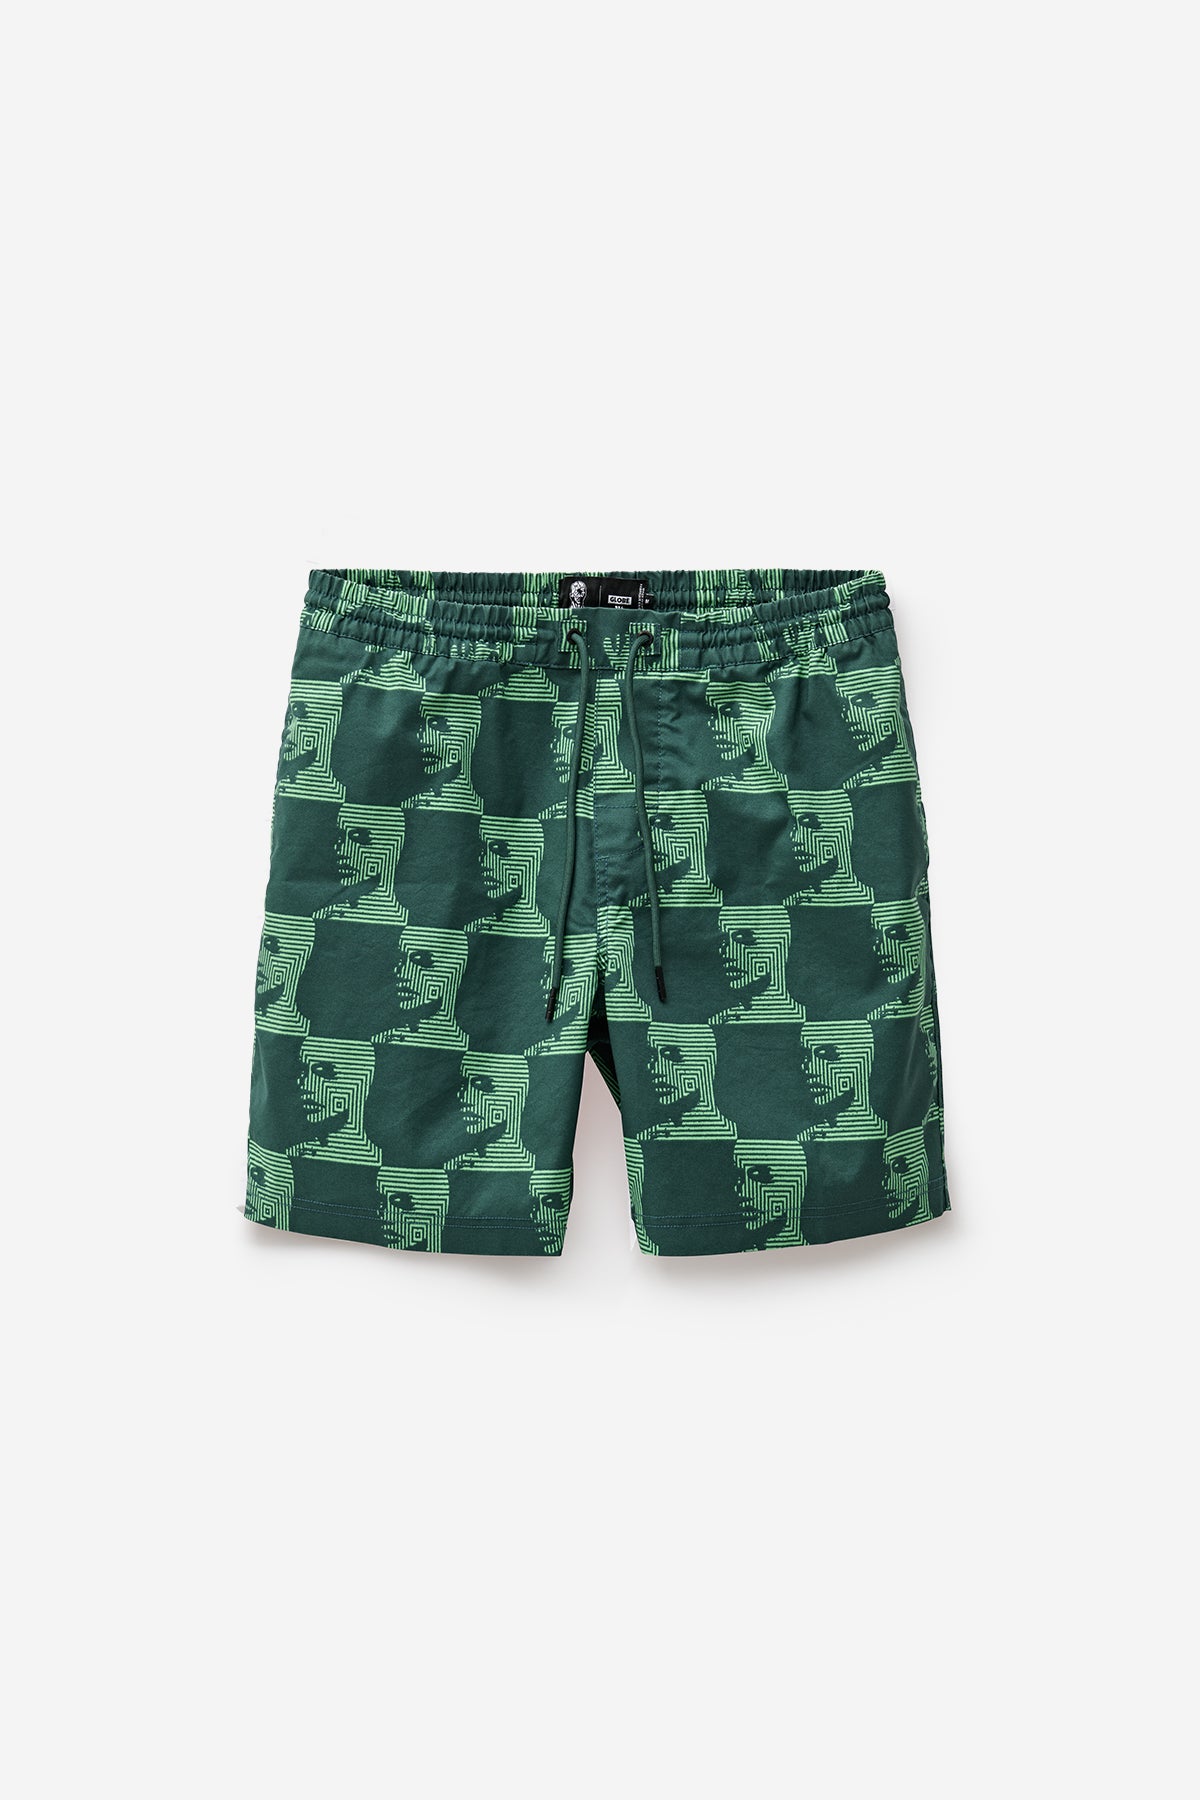 off body view of Circuits Poolshort - Night Green